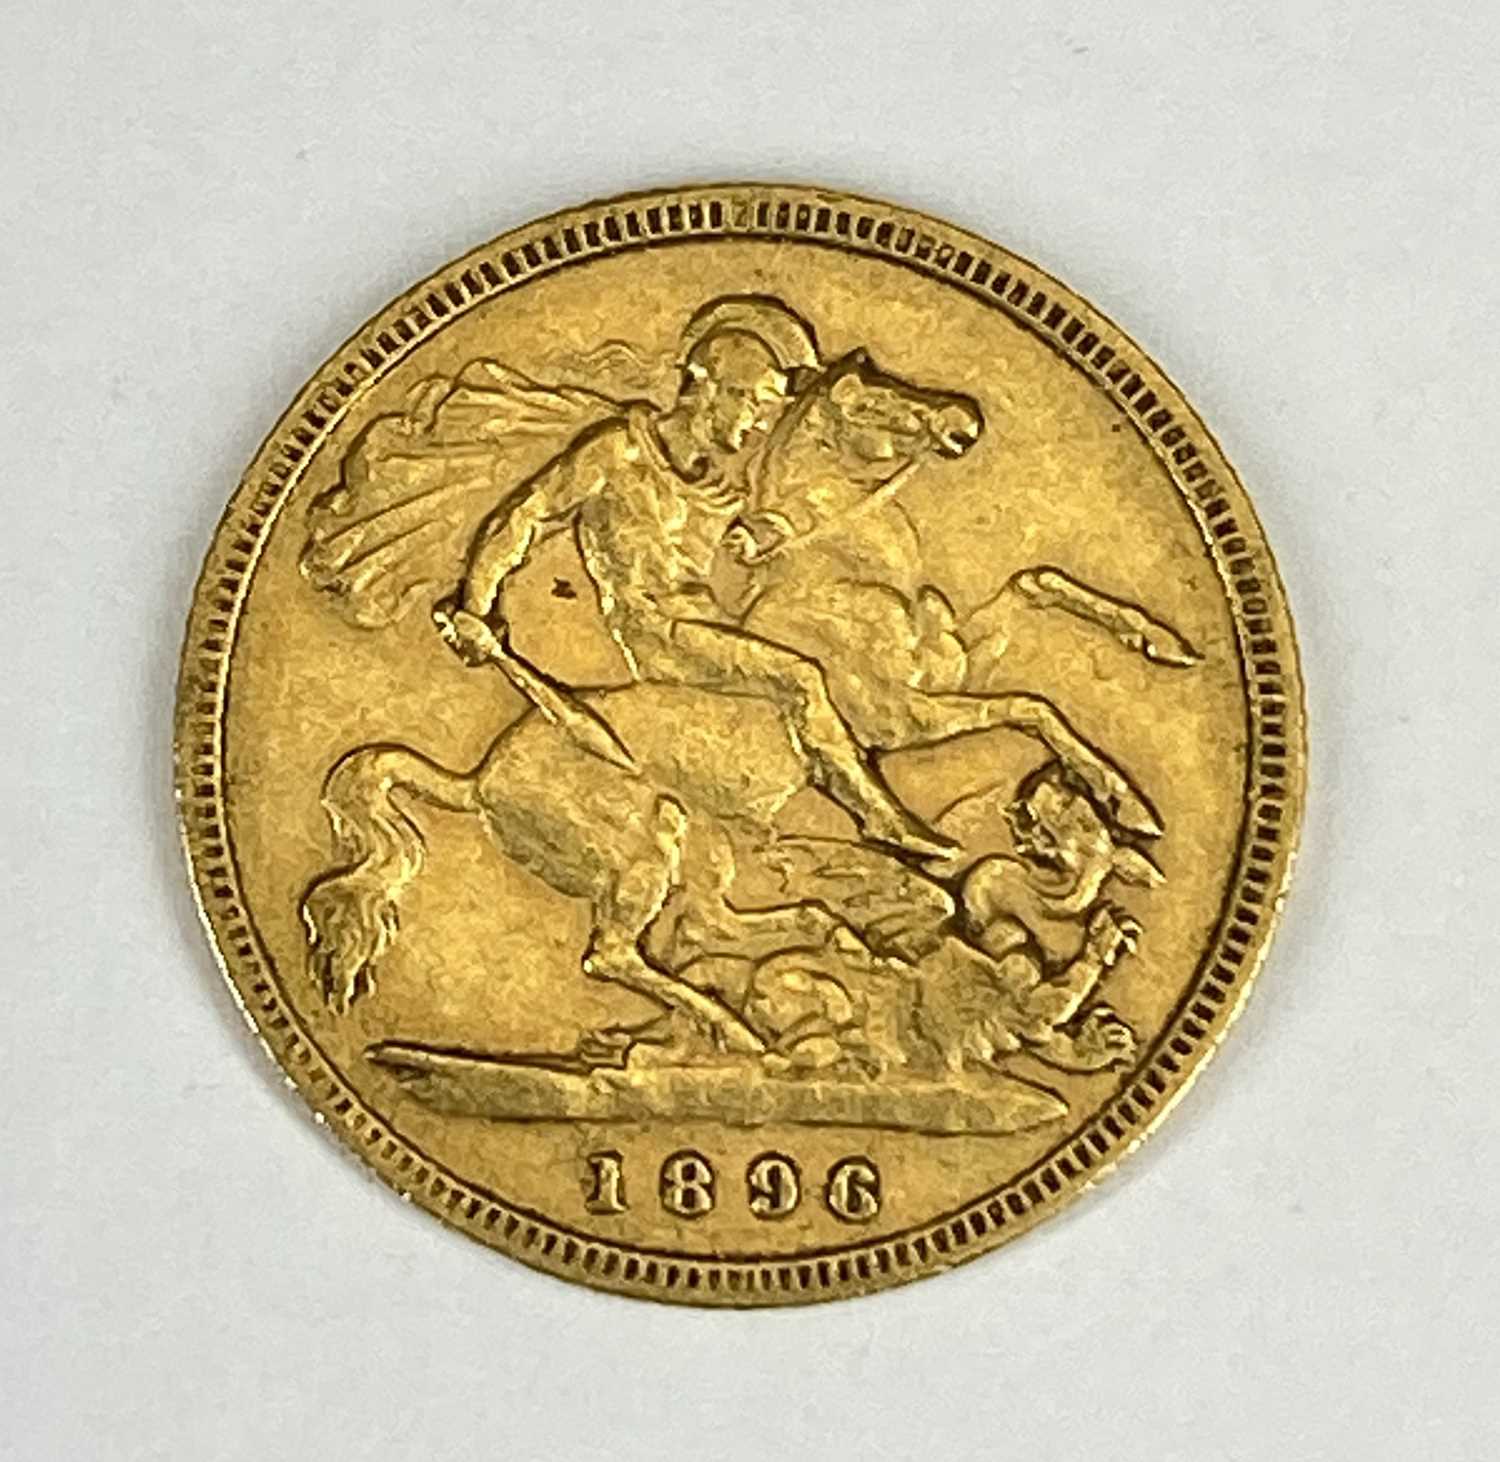 QUEEN VICTORIA VEILED HEAD GOLD HALF SOVEREIGN, 1896, 4g Provenance: private collection Gwynedd